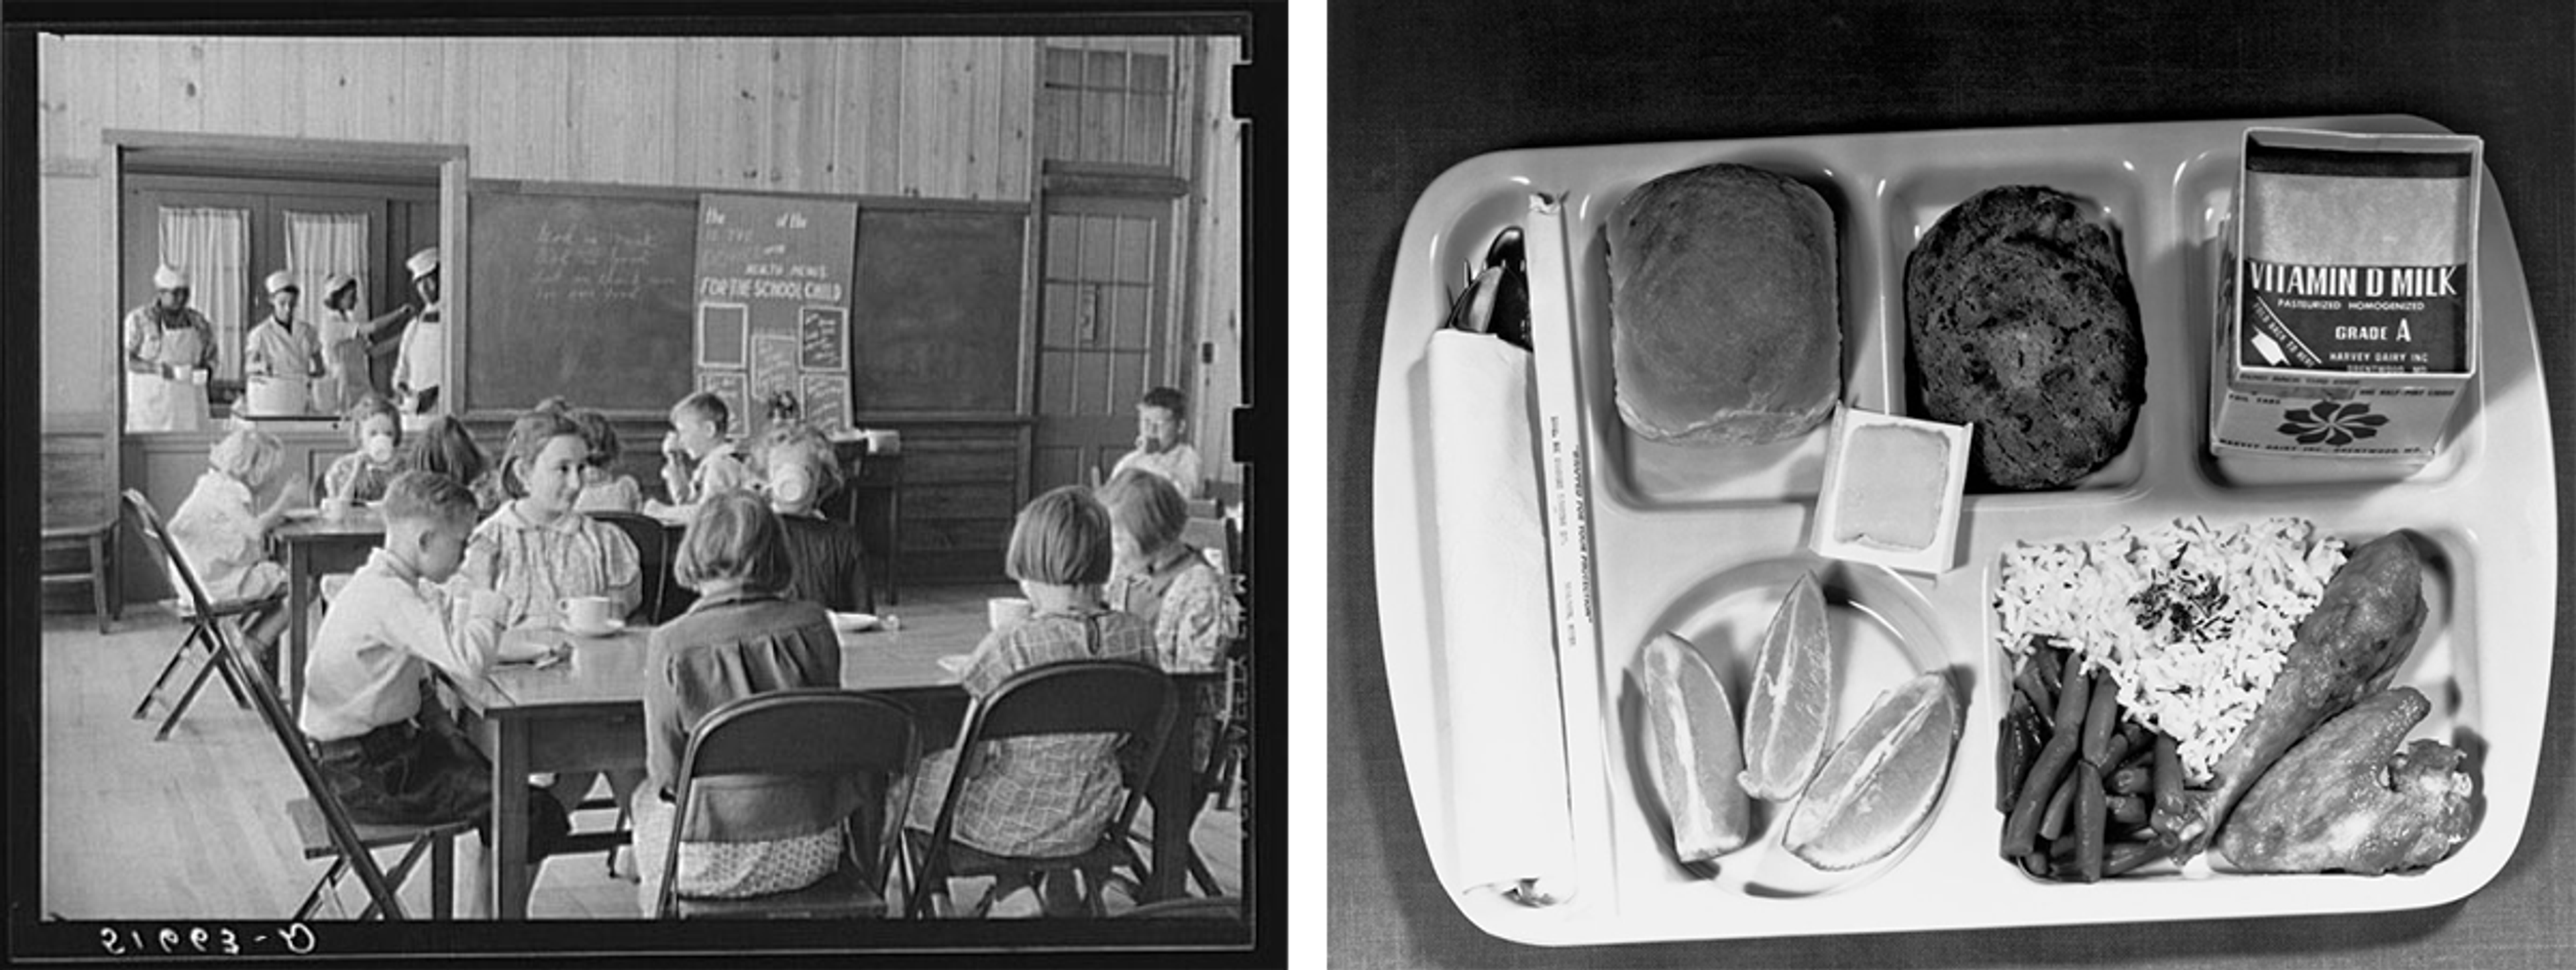 Children sit at lunch tables while women cook in the kitchen in the background. An overhead view of a school lunch tray containing chicken, rice, green beans, bread, fruit, a dessert, and milk.